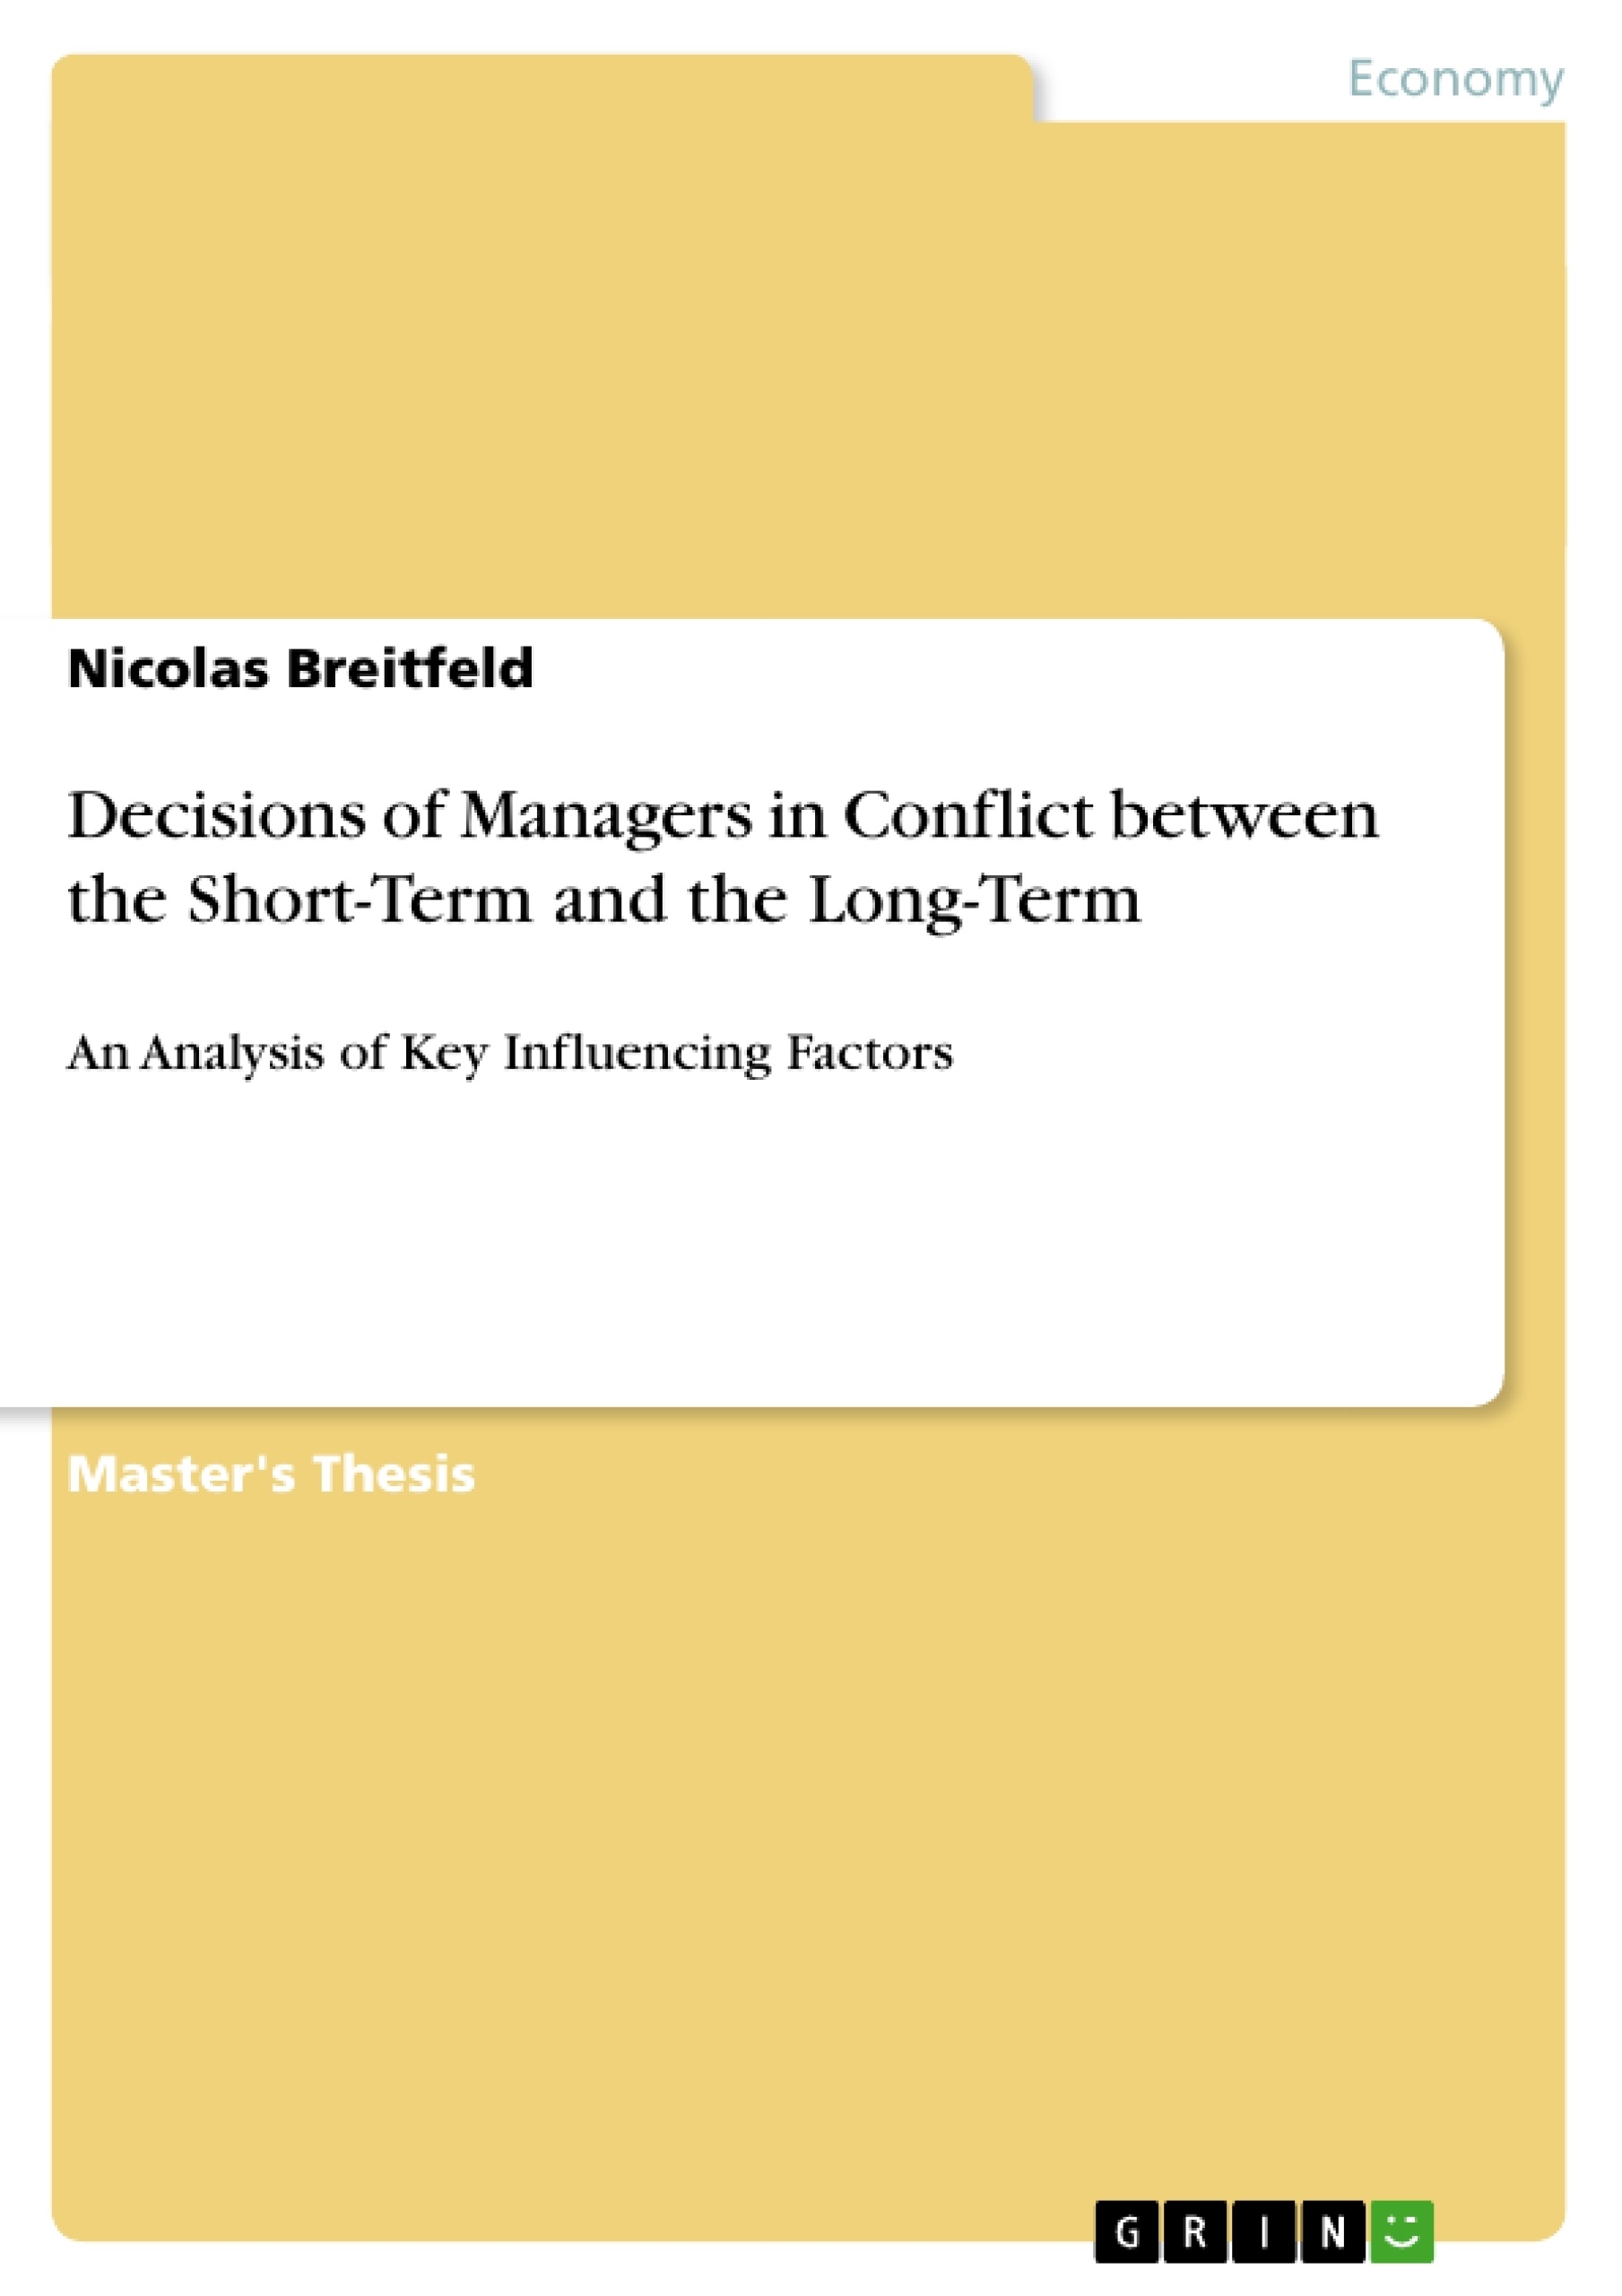 Title: Decisions of Managers in Conflict between the Short-Term and the Long-Term